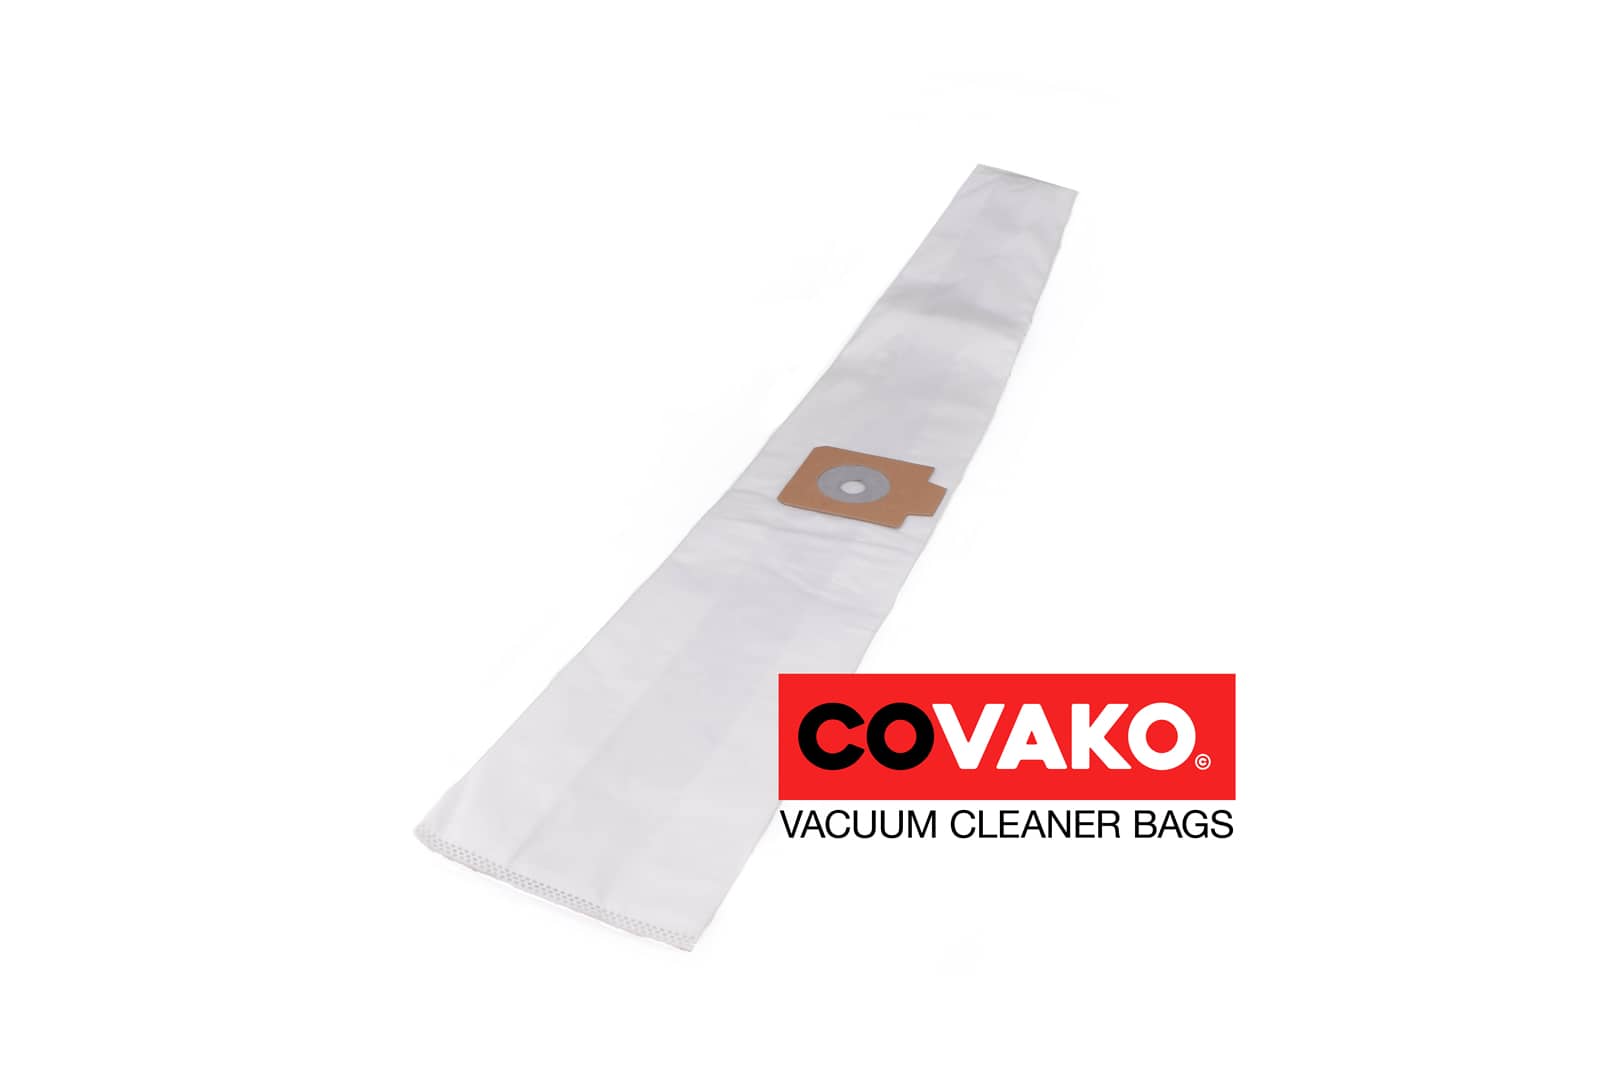 Alto GD 930 S2 Hepa / Synthesis - Alto vacuum cleaner bags